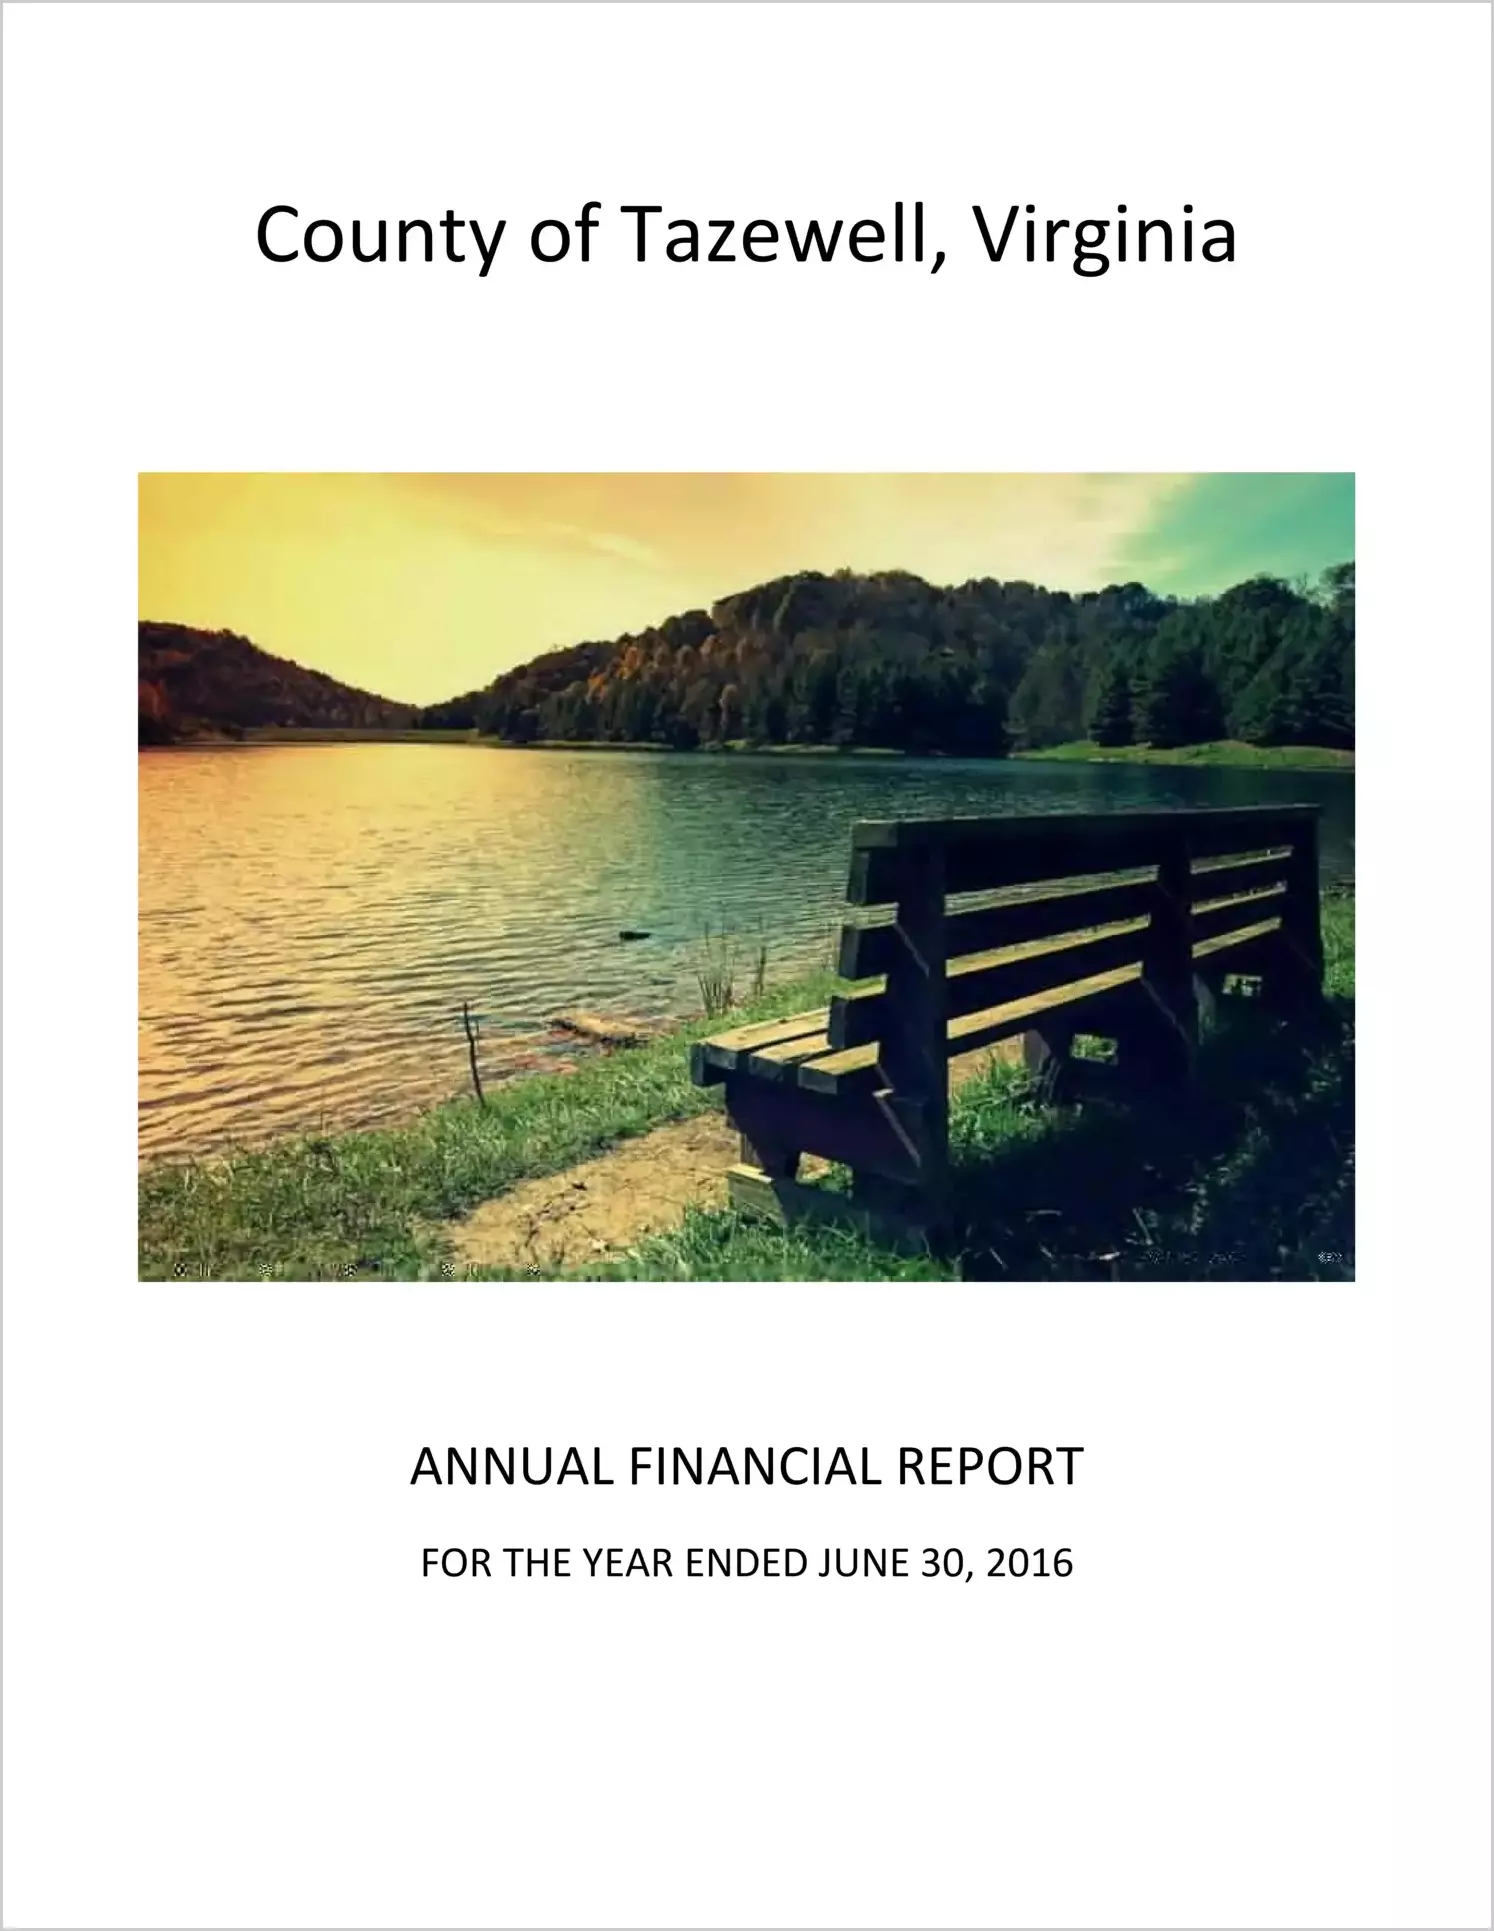 2016 Annual Financial Report for County of Tazewell